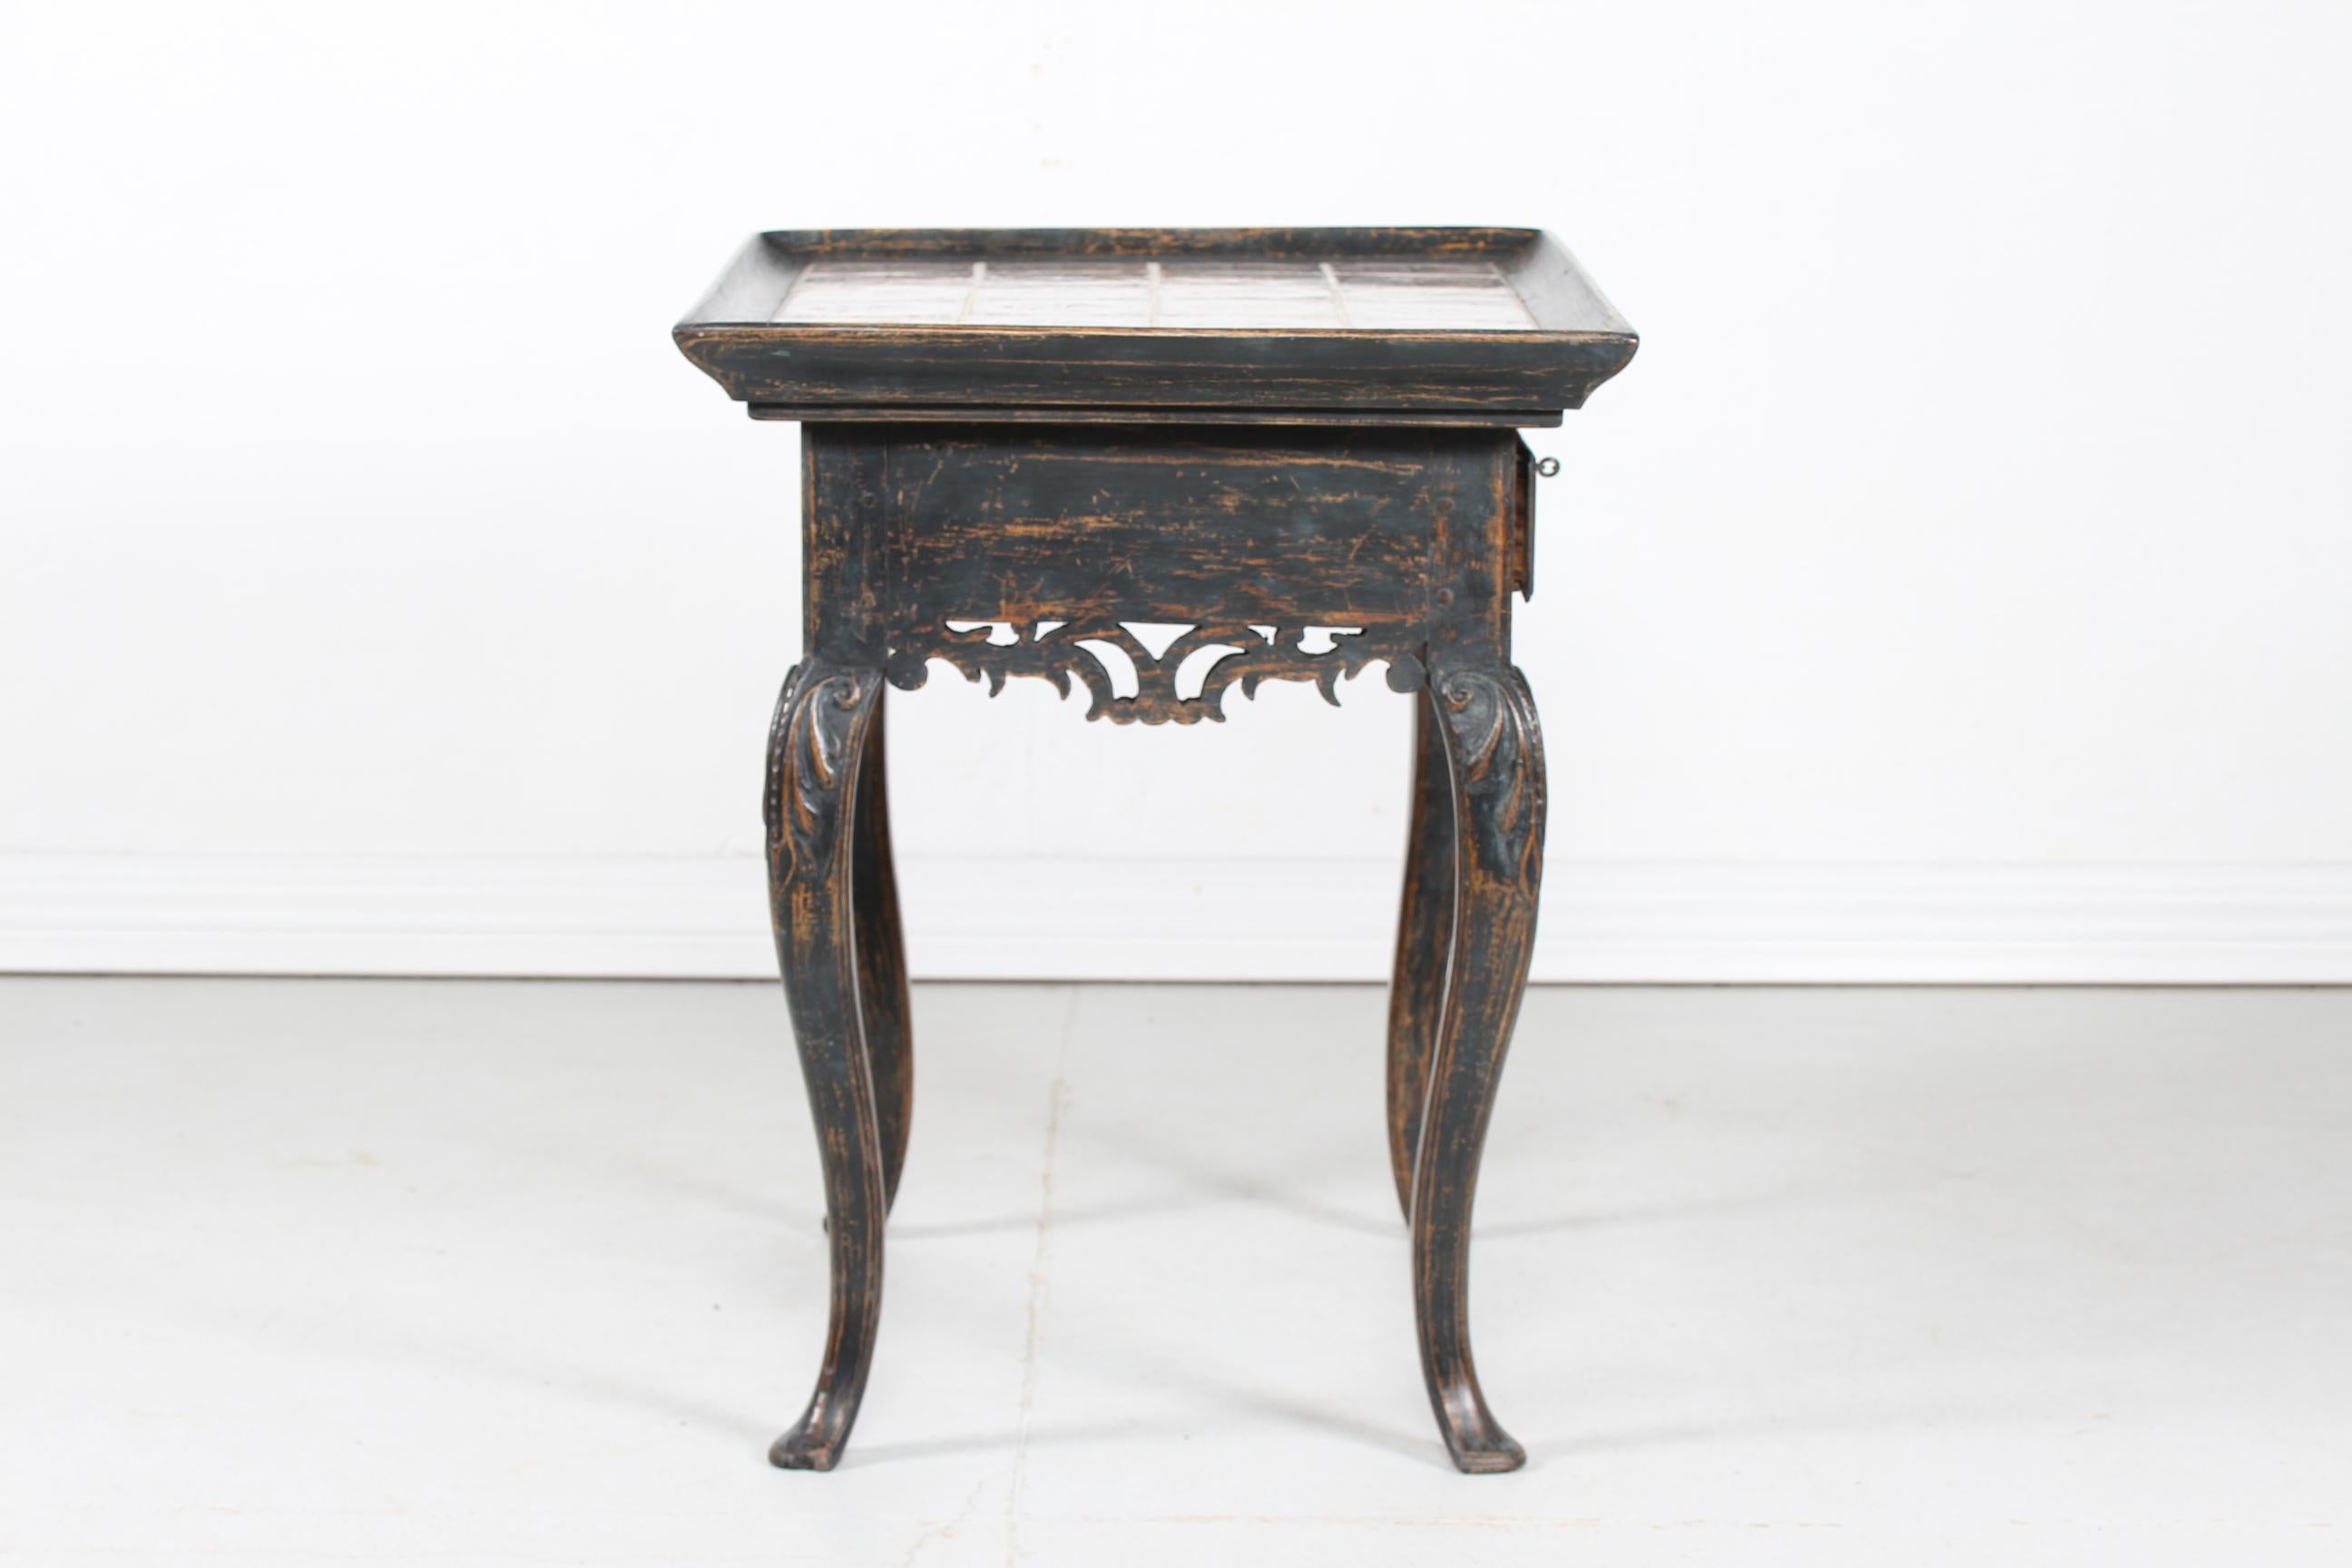 Scandinavian Rococo Table from the 19th Century with Dutch Handpainted Tiles 2